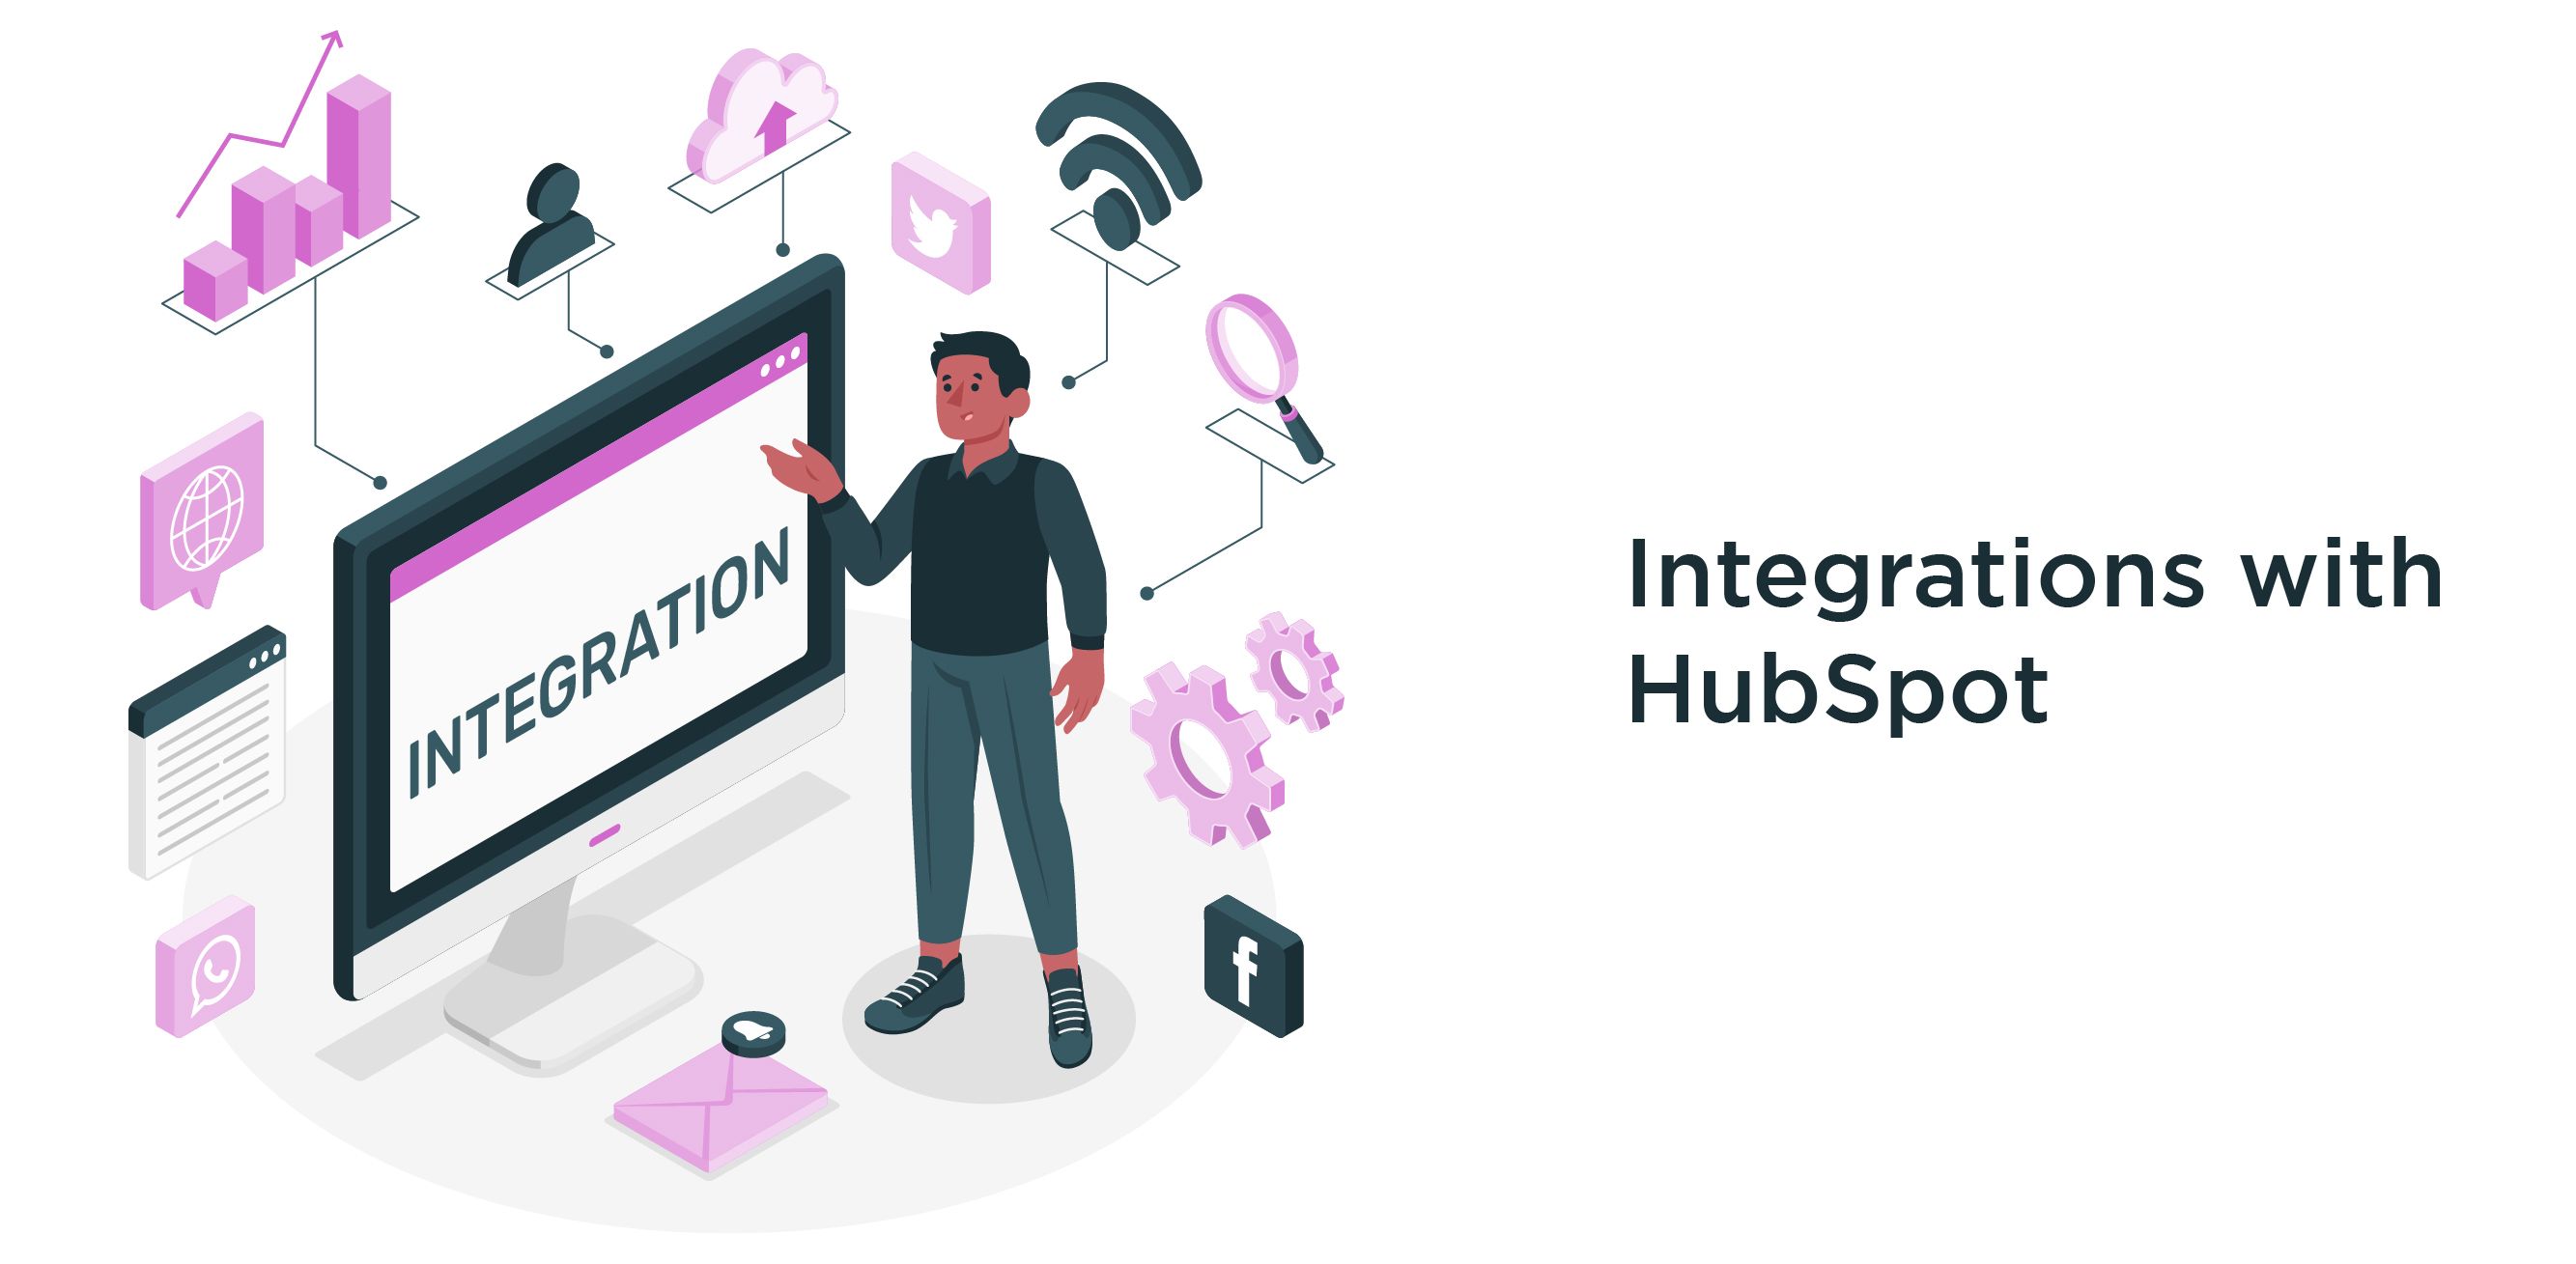 Integrations with HubSpot